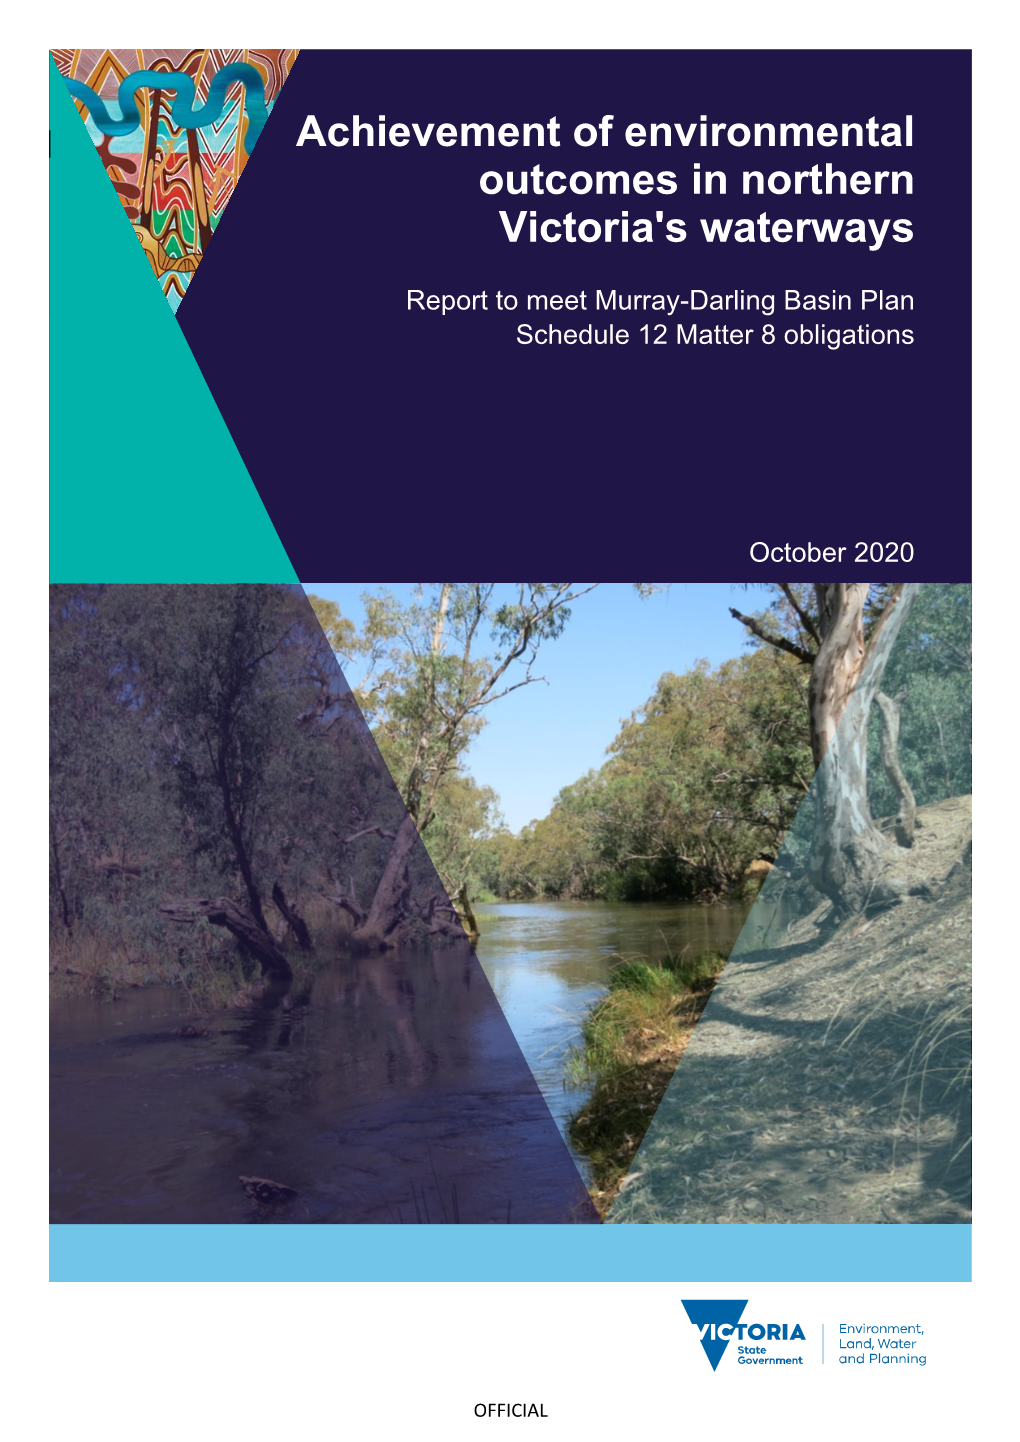 Achievement of Environmental Outcomes in Northern Victoria's Waterways